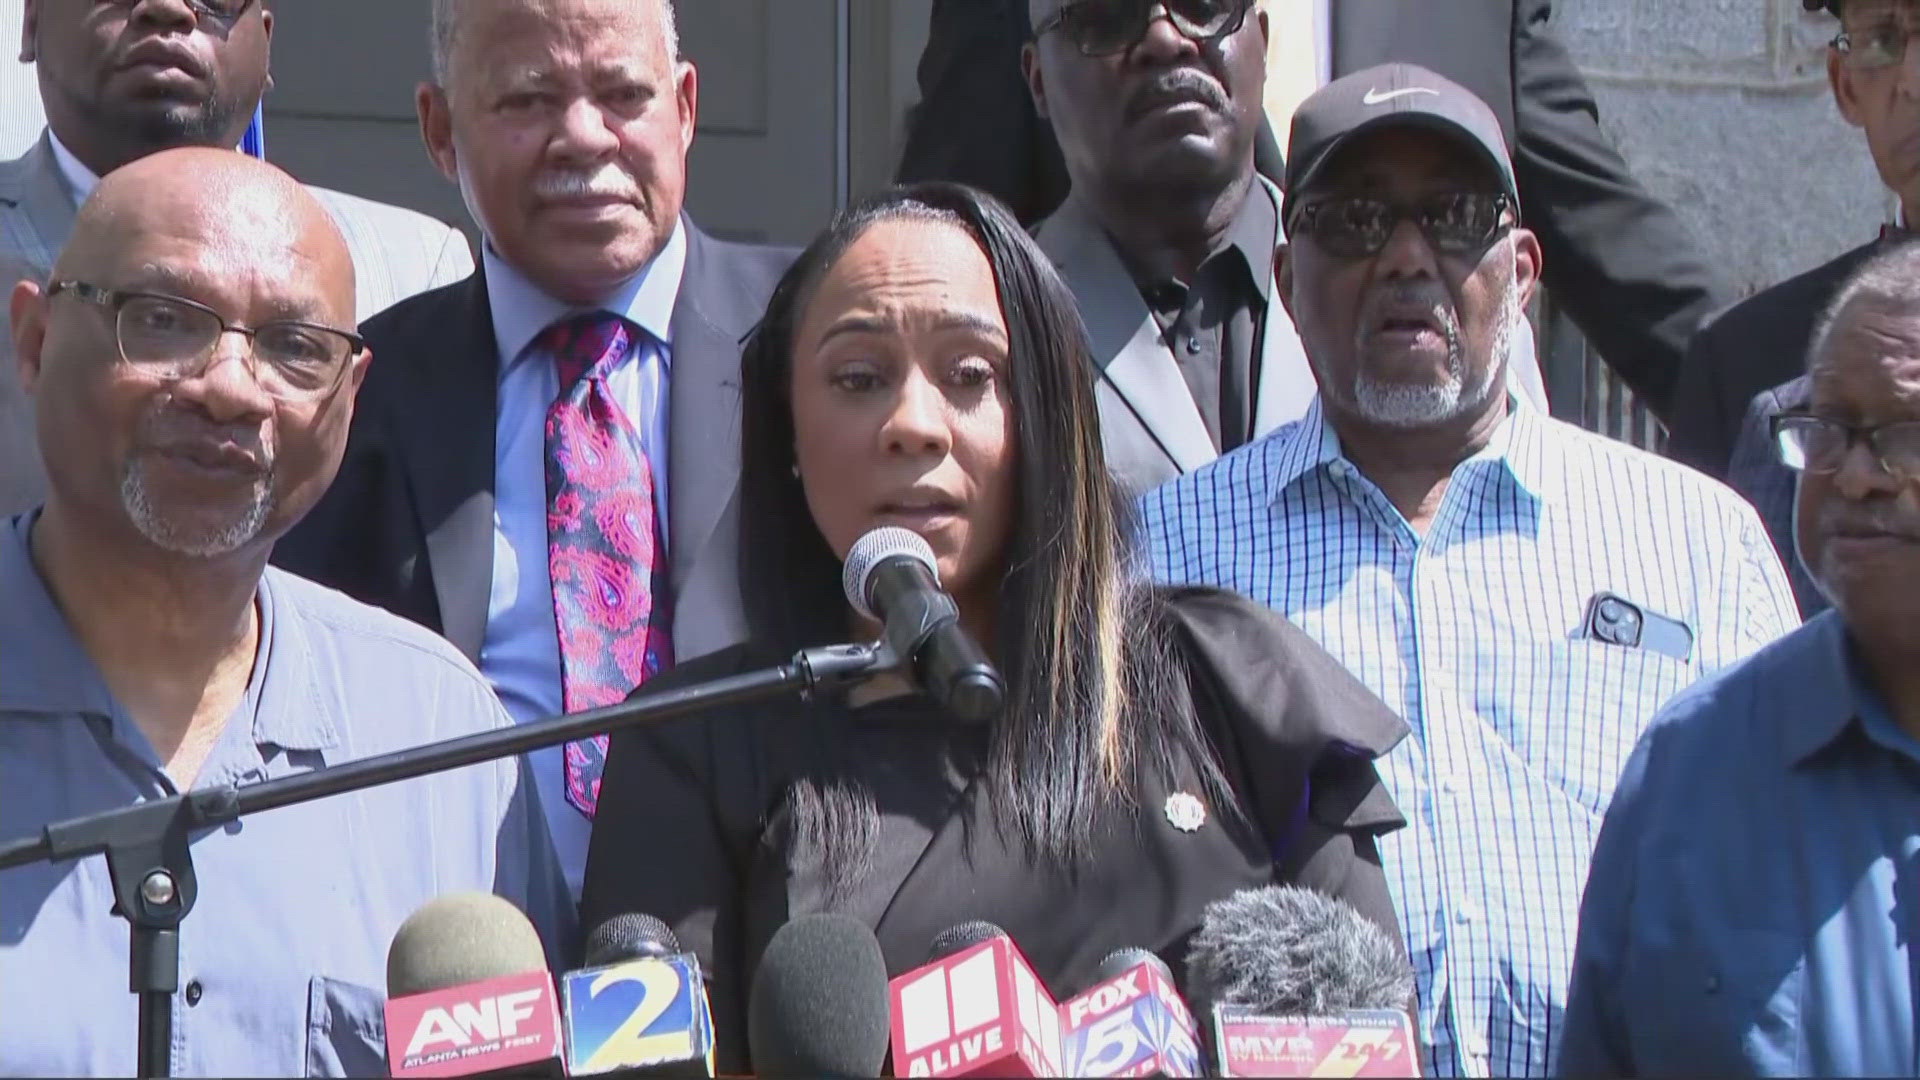 A news conference was held Monday morning at Big Bethel AME Church on Auburn Avenue.